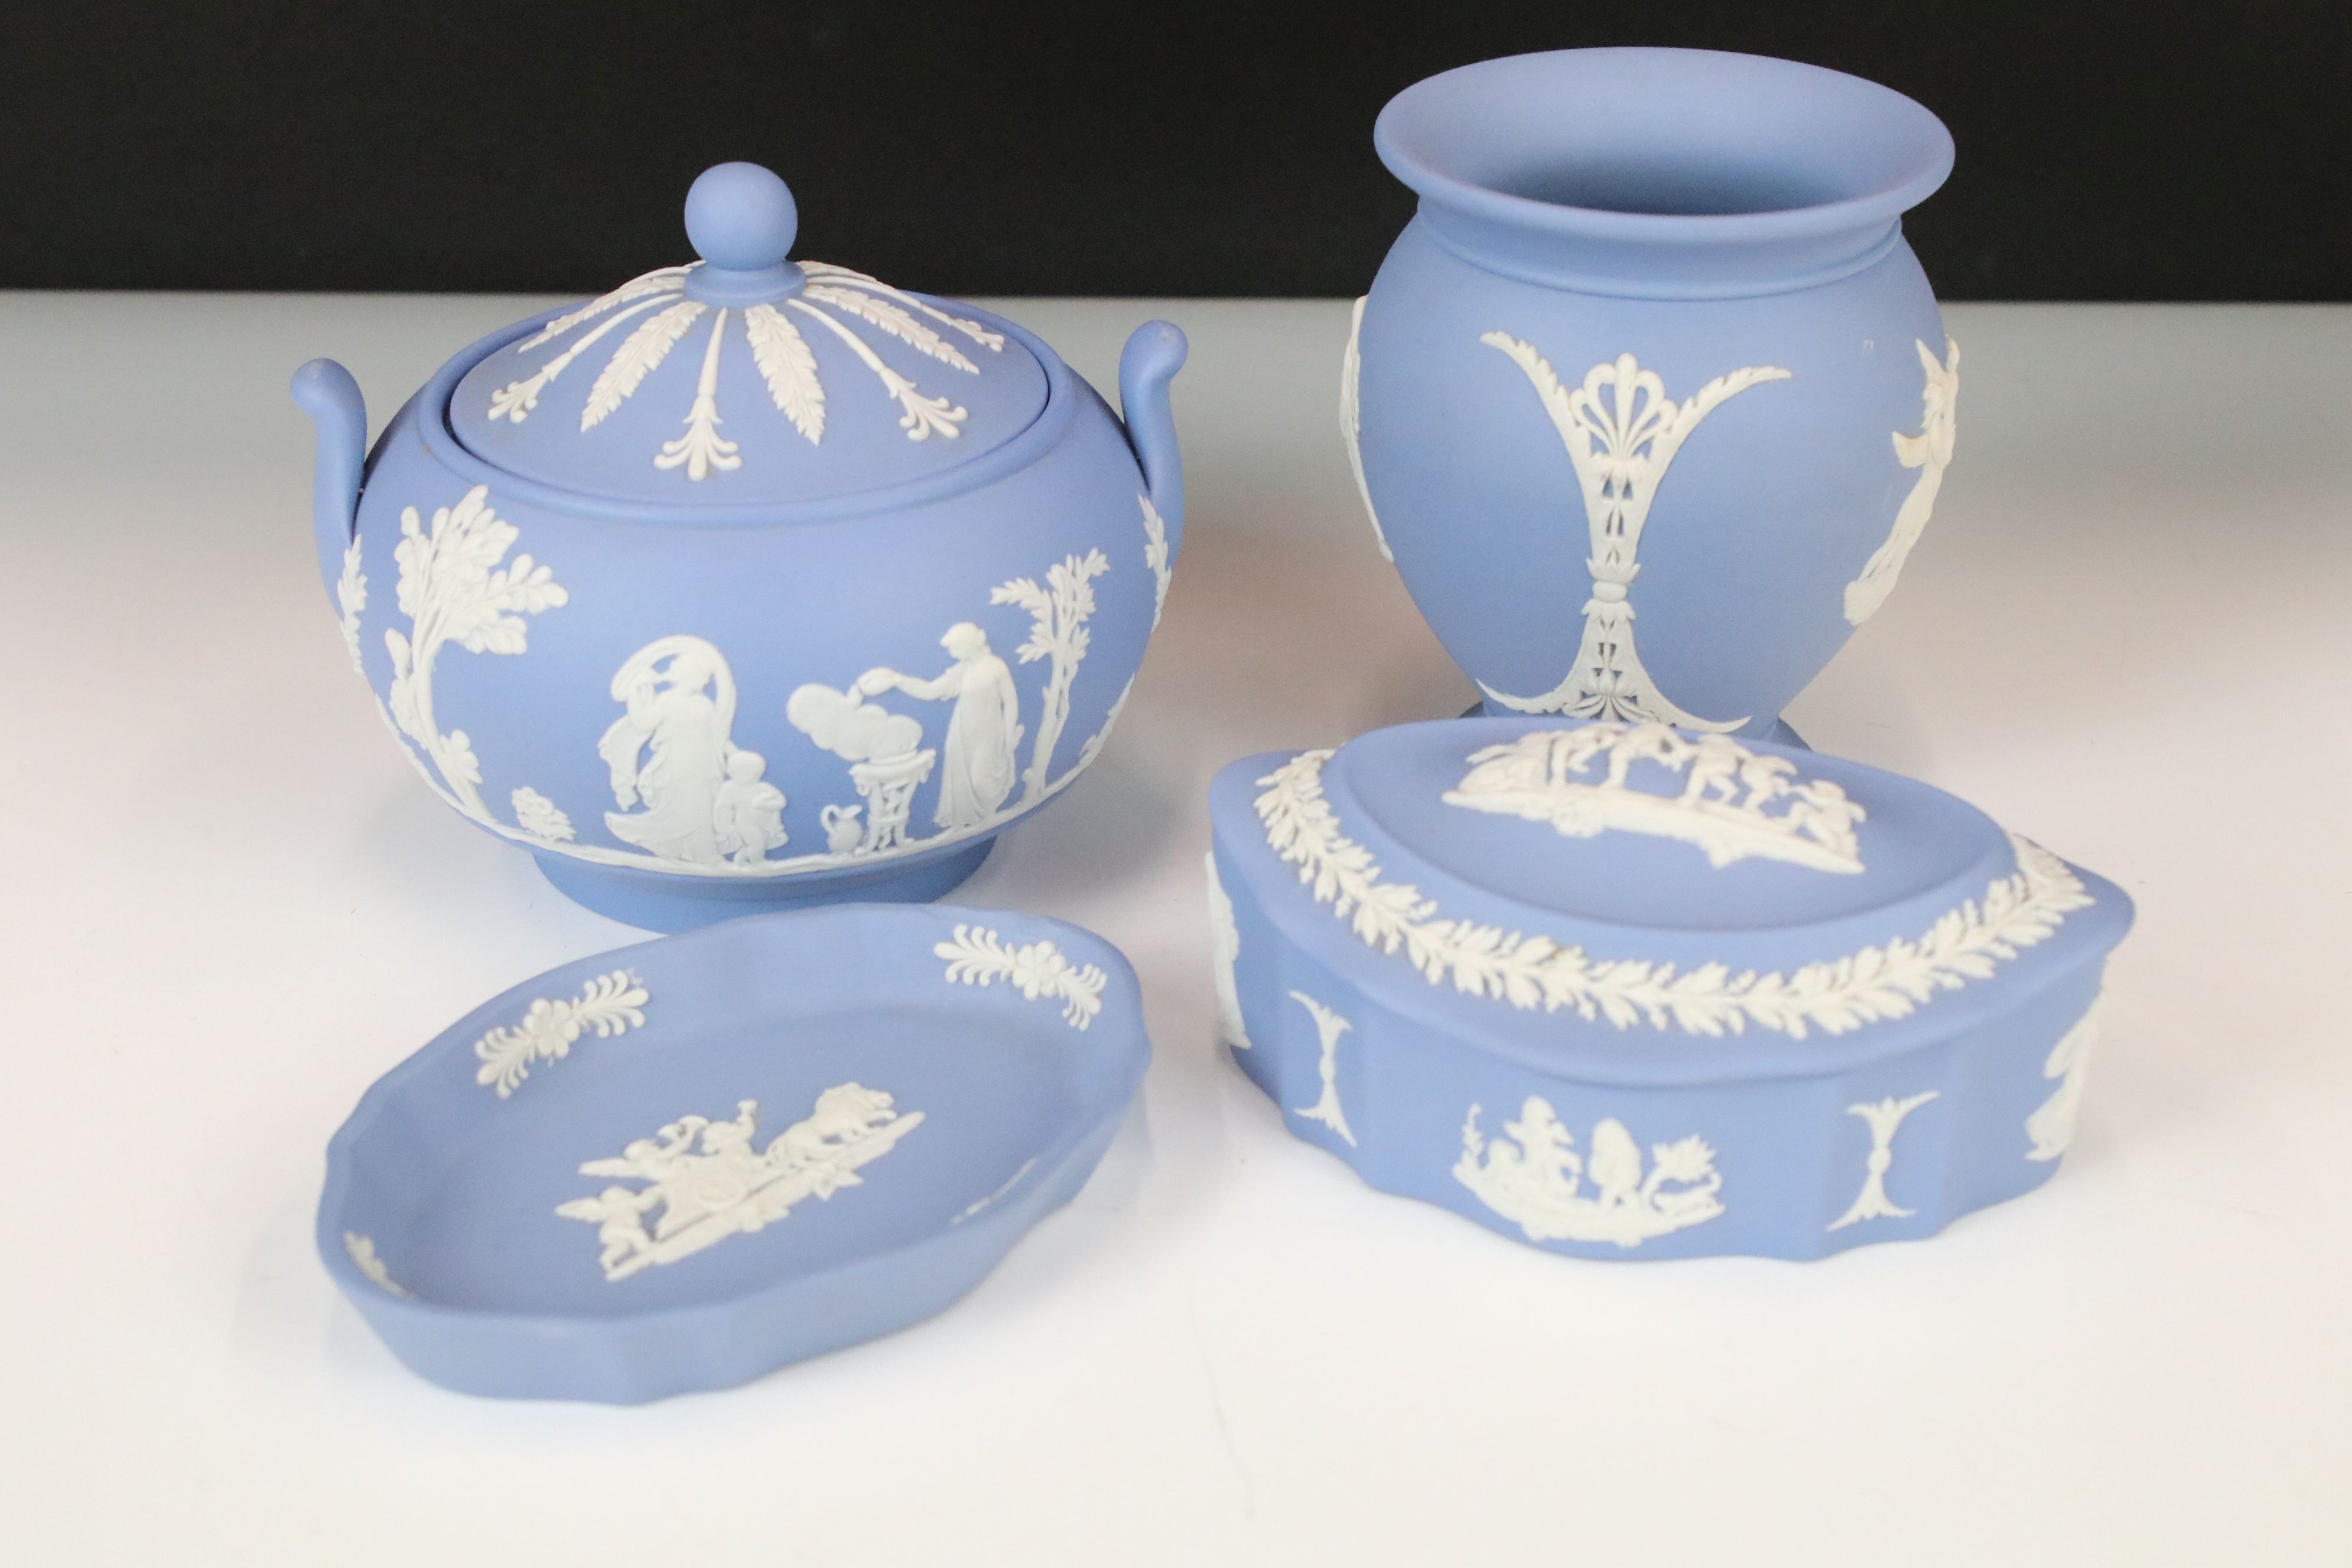 Wedgwood Jasperware Pale Blue Tea Service for 6 to include 2 x teapots & covers, 6 teacups & - Image 11 of 12